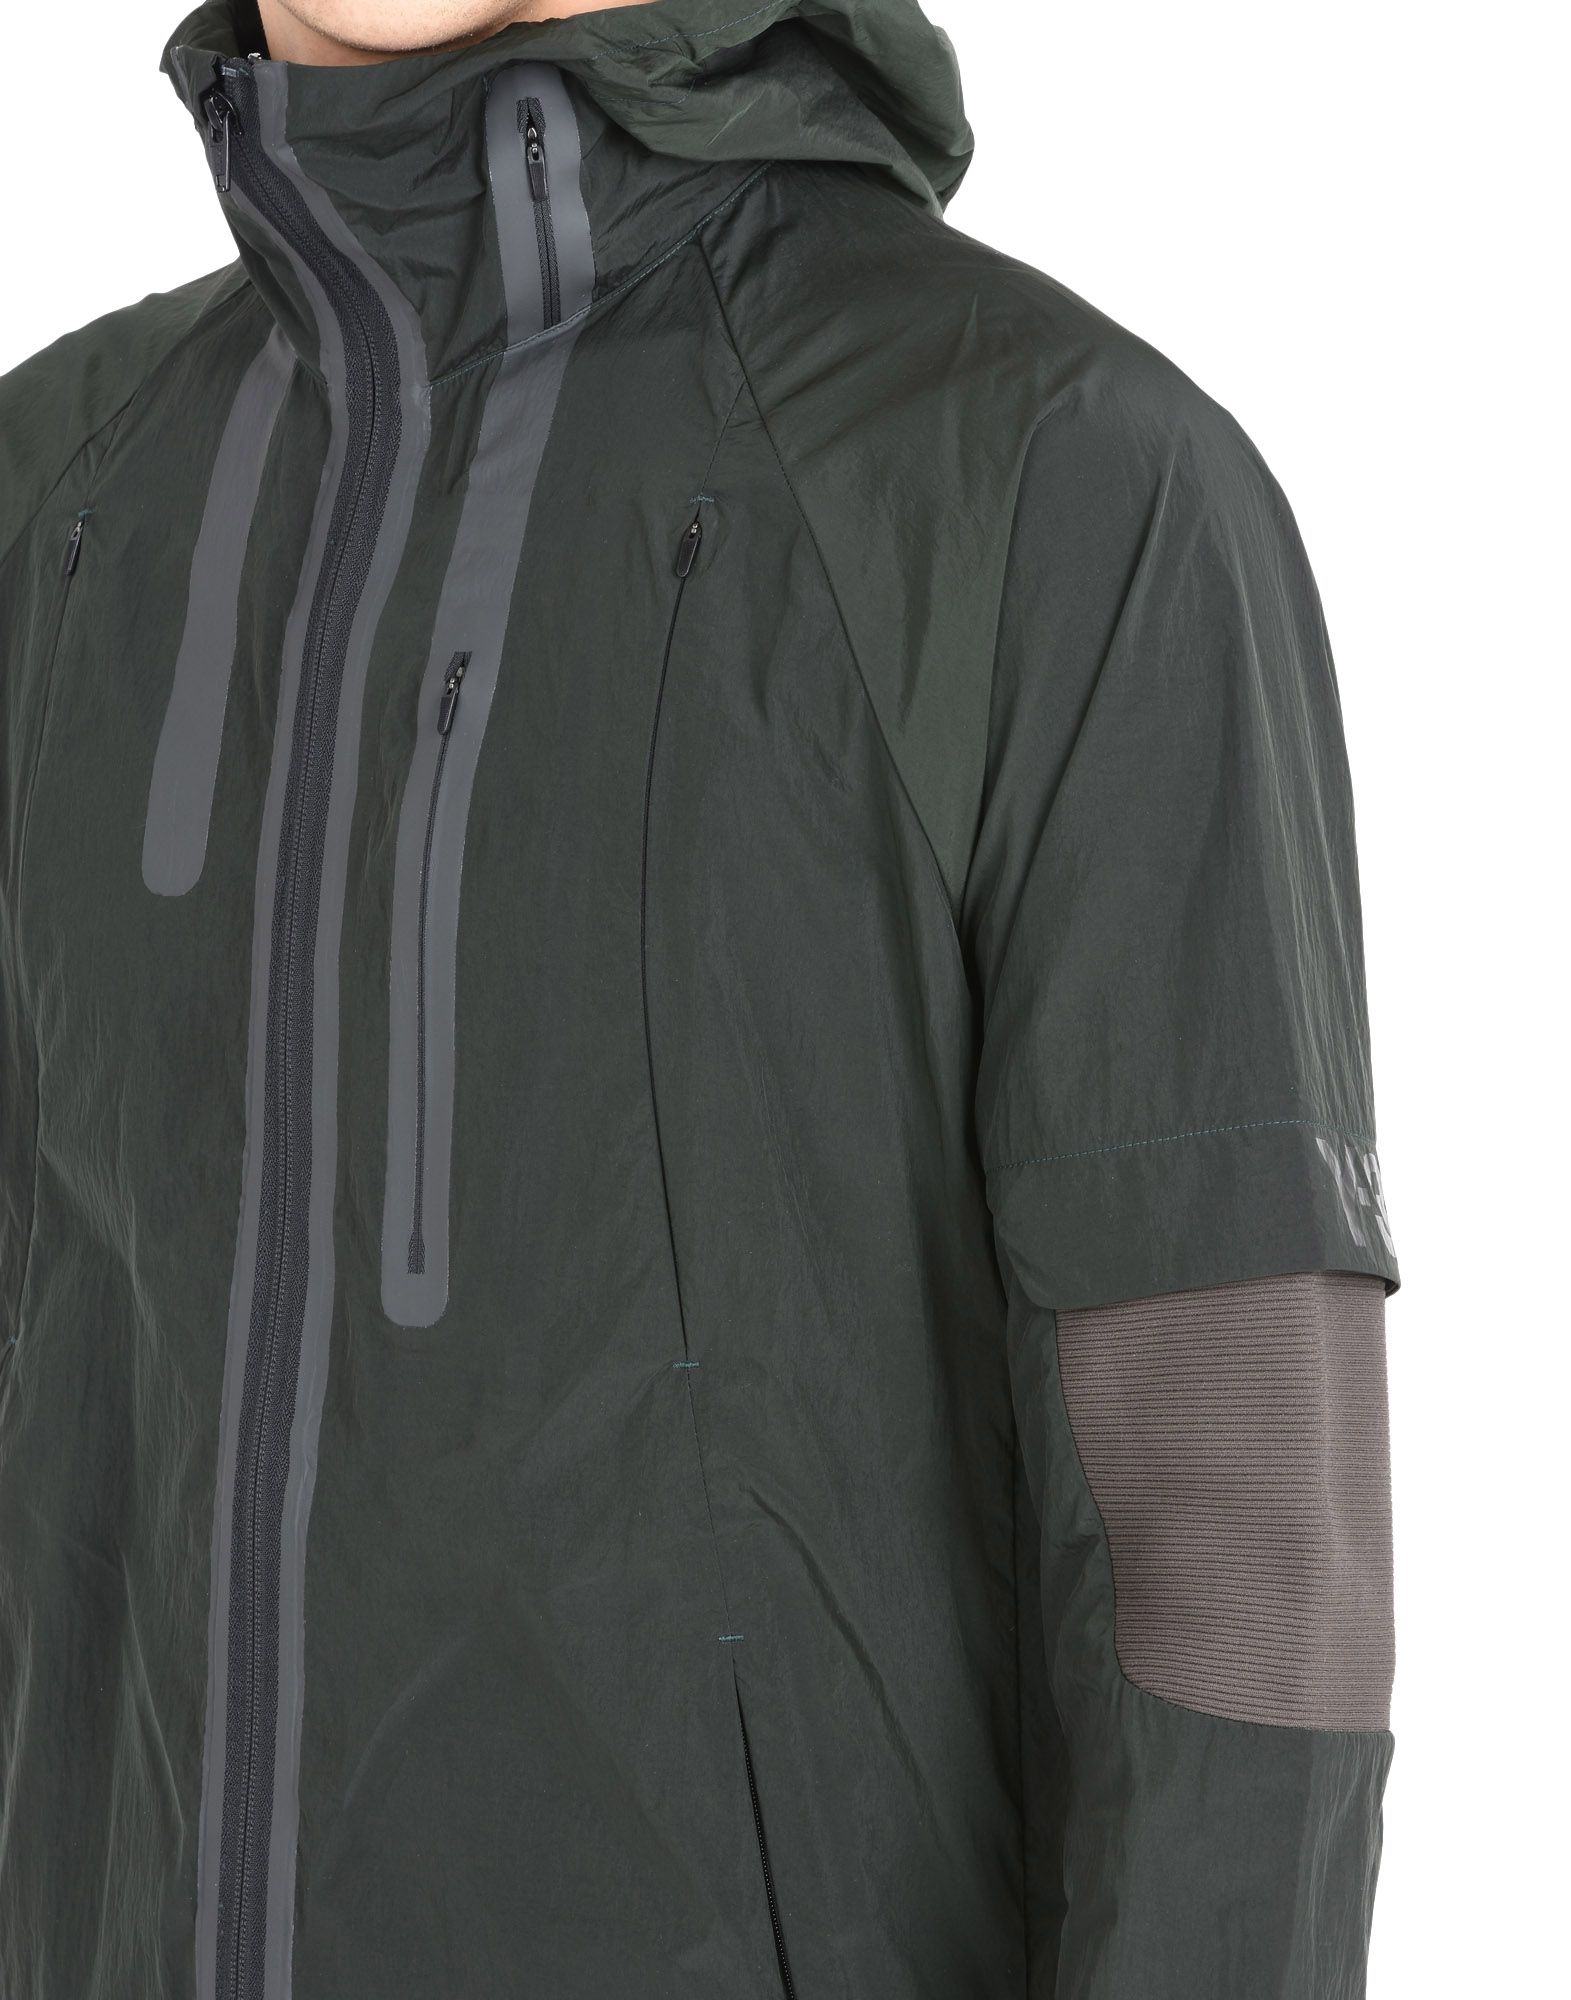 Y 3 HOODED JACKET for Men | Adidas Y-3 Official Store